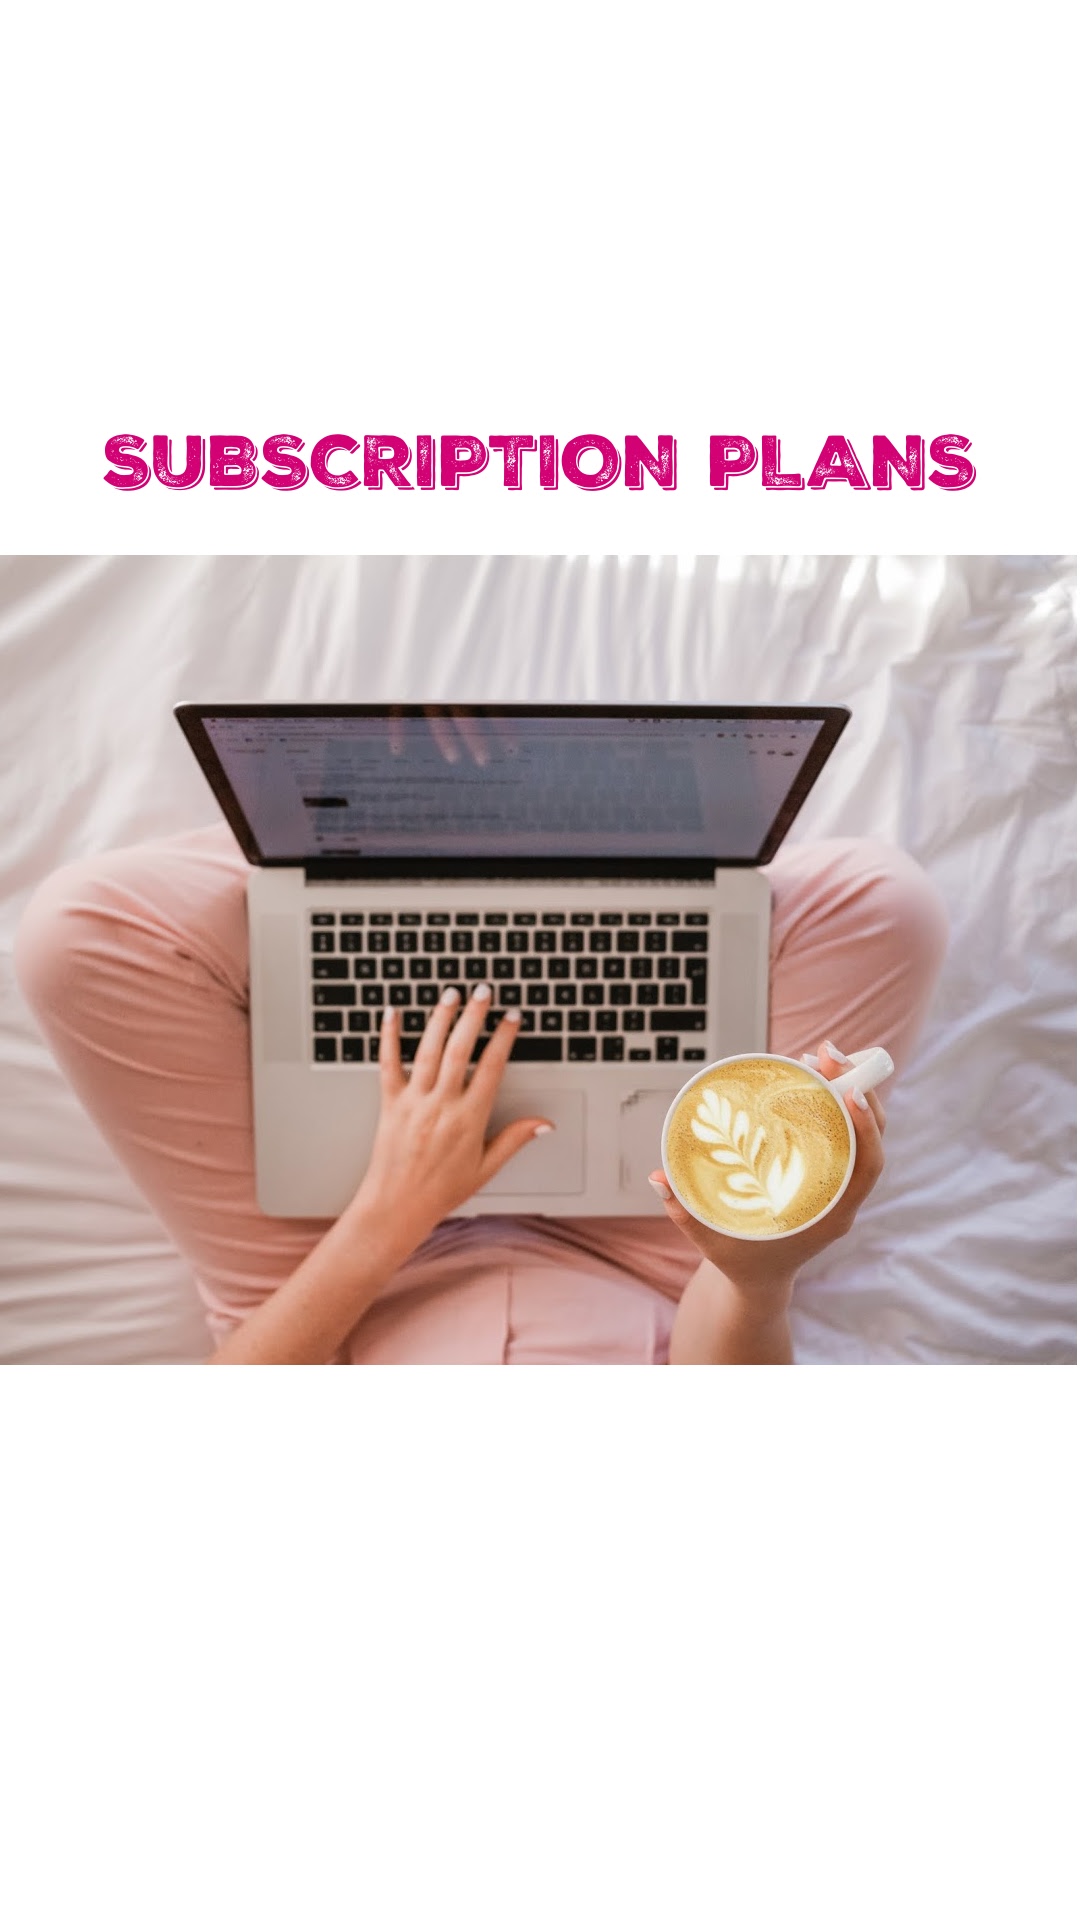 What are the different subscription plans?